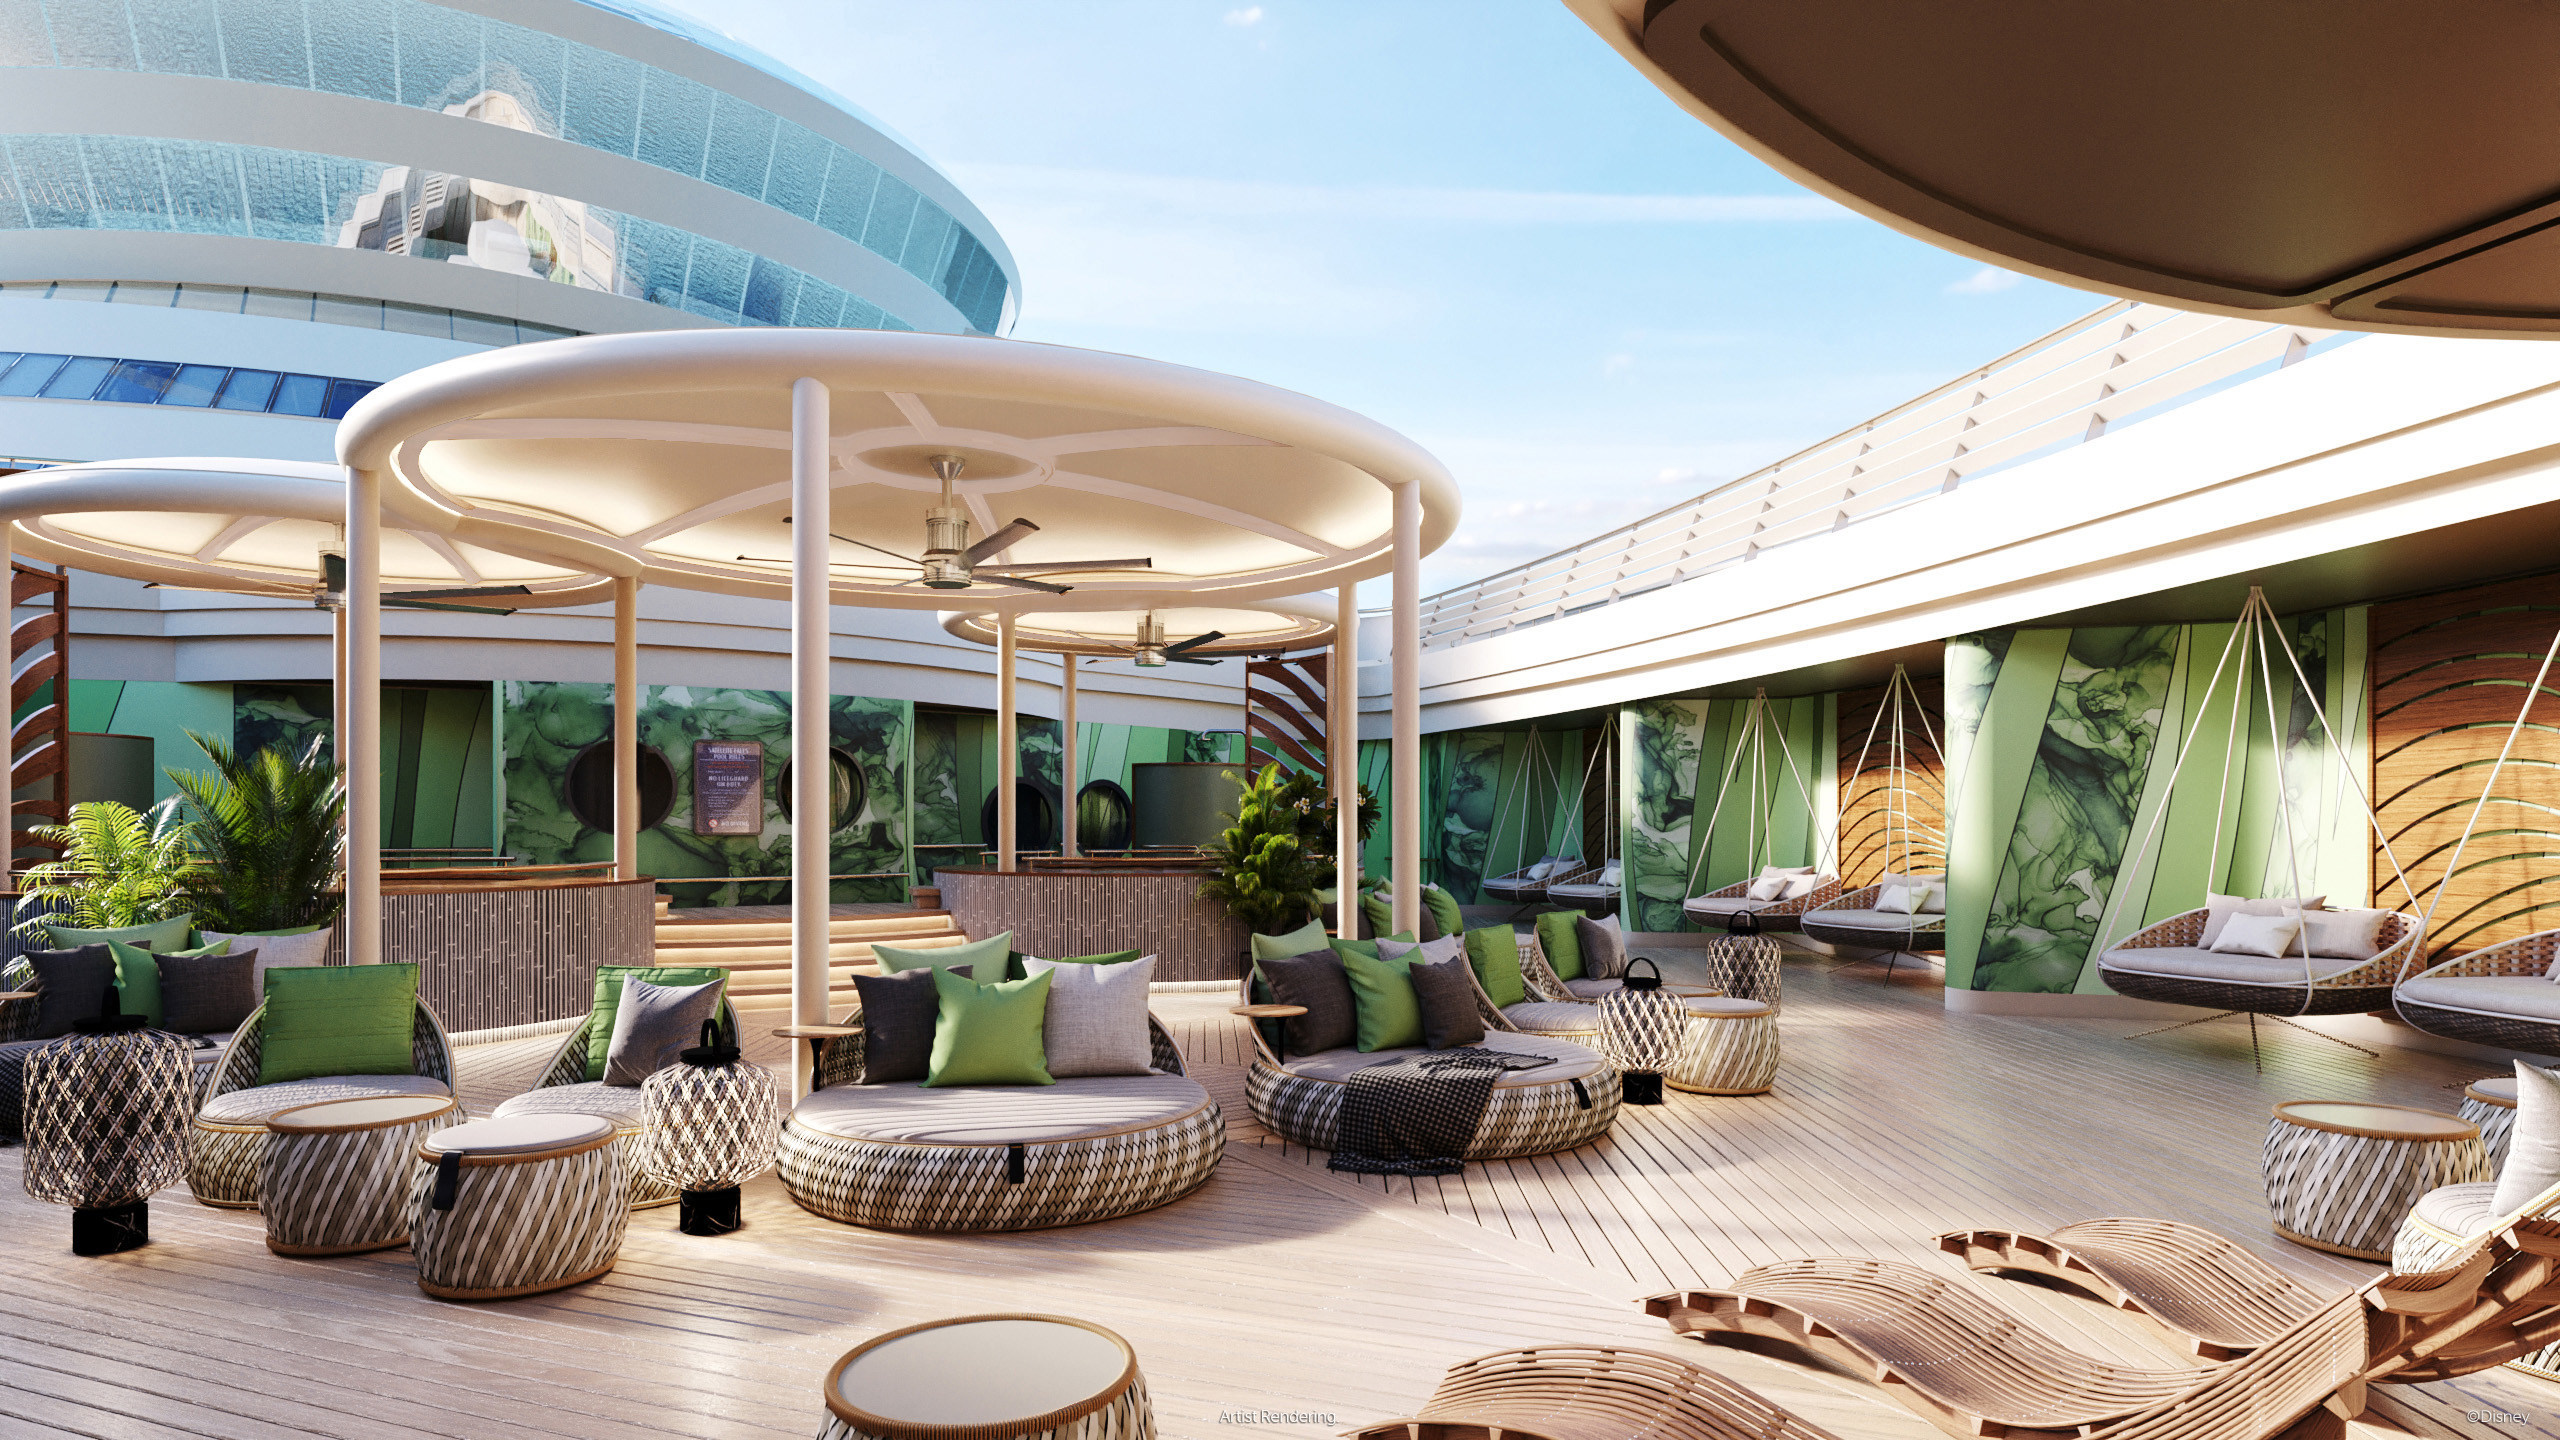 For the first time aboard a Disney ship, Senses Spa will feature a dedicated outdoor relaxation space where guests can unwind in whirlpool spas, rest on plush loungers and find their center during yoga sessions. This open-air oasis is a brand-new extension to Disney Cruise Line’s signature Rainforest experience, which has been reimagined for the Disney Wish to provide even more ways to relax and rejuvenate (July 2021)